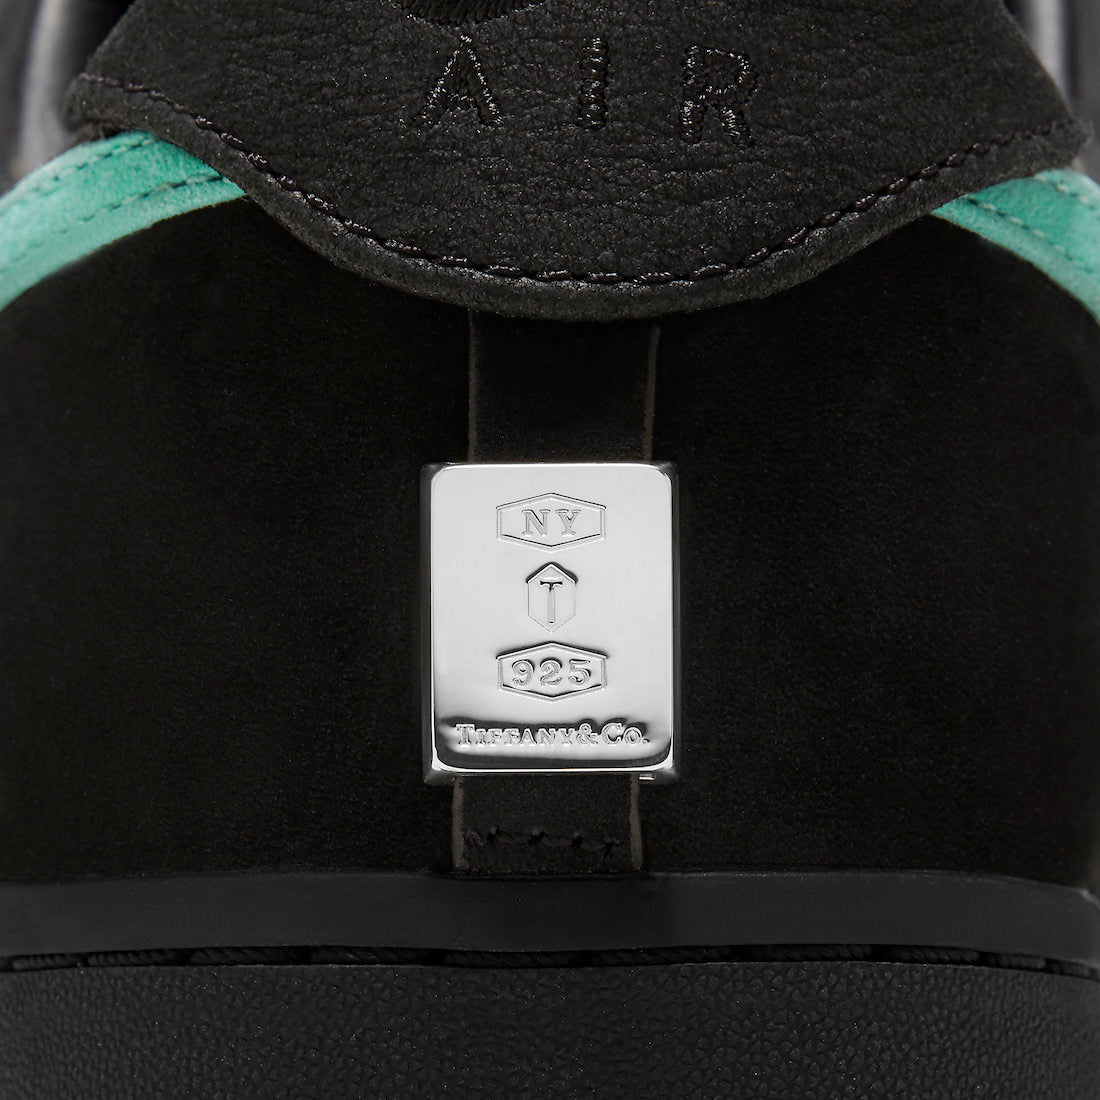 Tiffany & Co. x Nike Air Force 1 Low “1837”